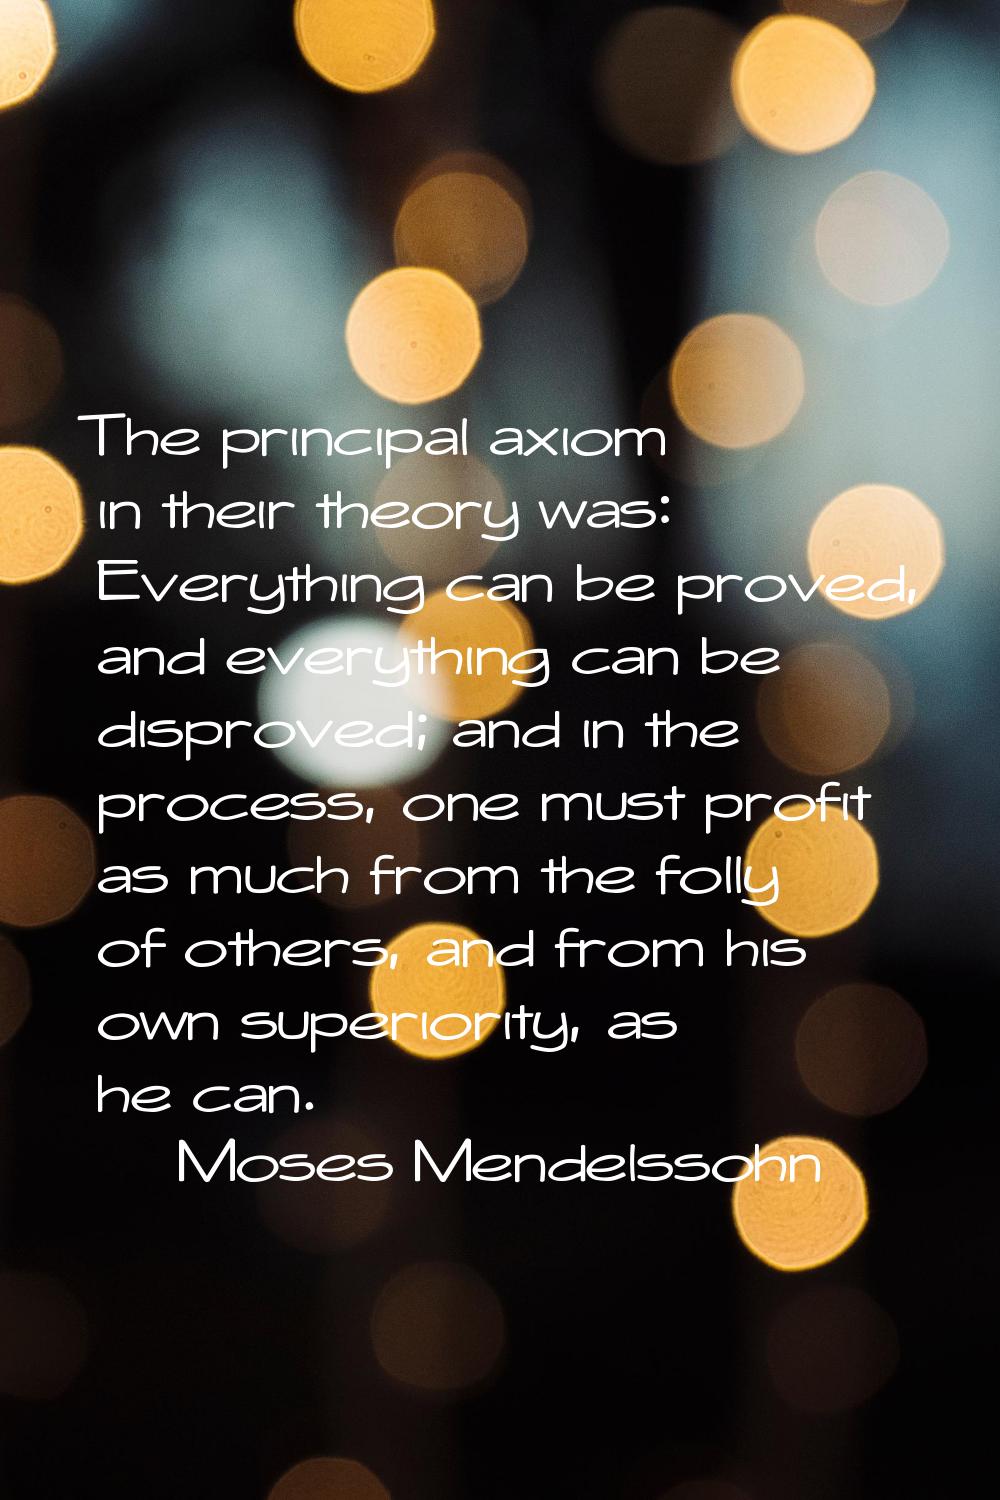 The principal axiom in their theory was: Everything can be proved, and everything can be disproved;